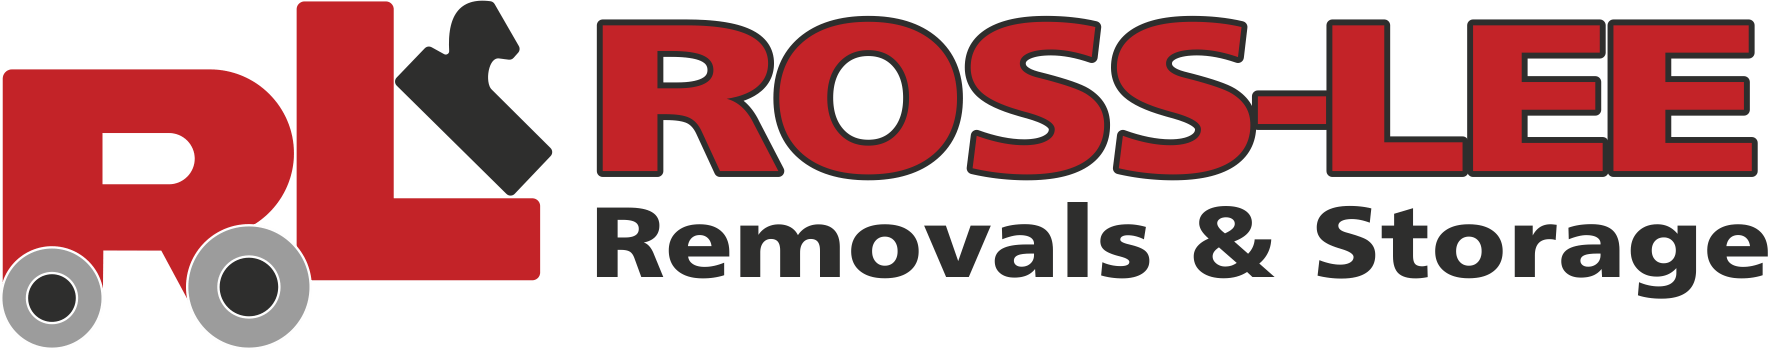 Ross Lee Removals